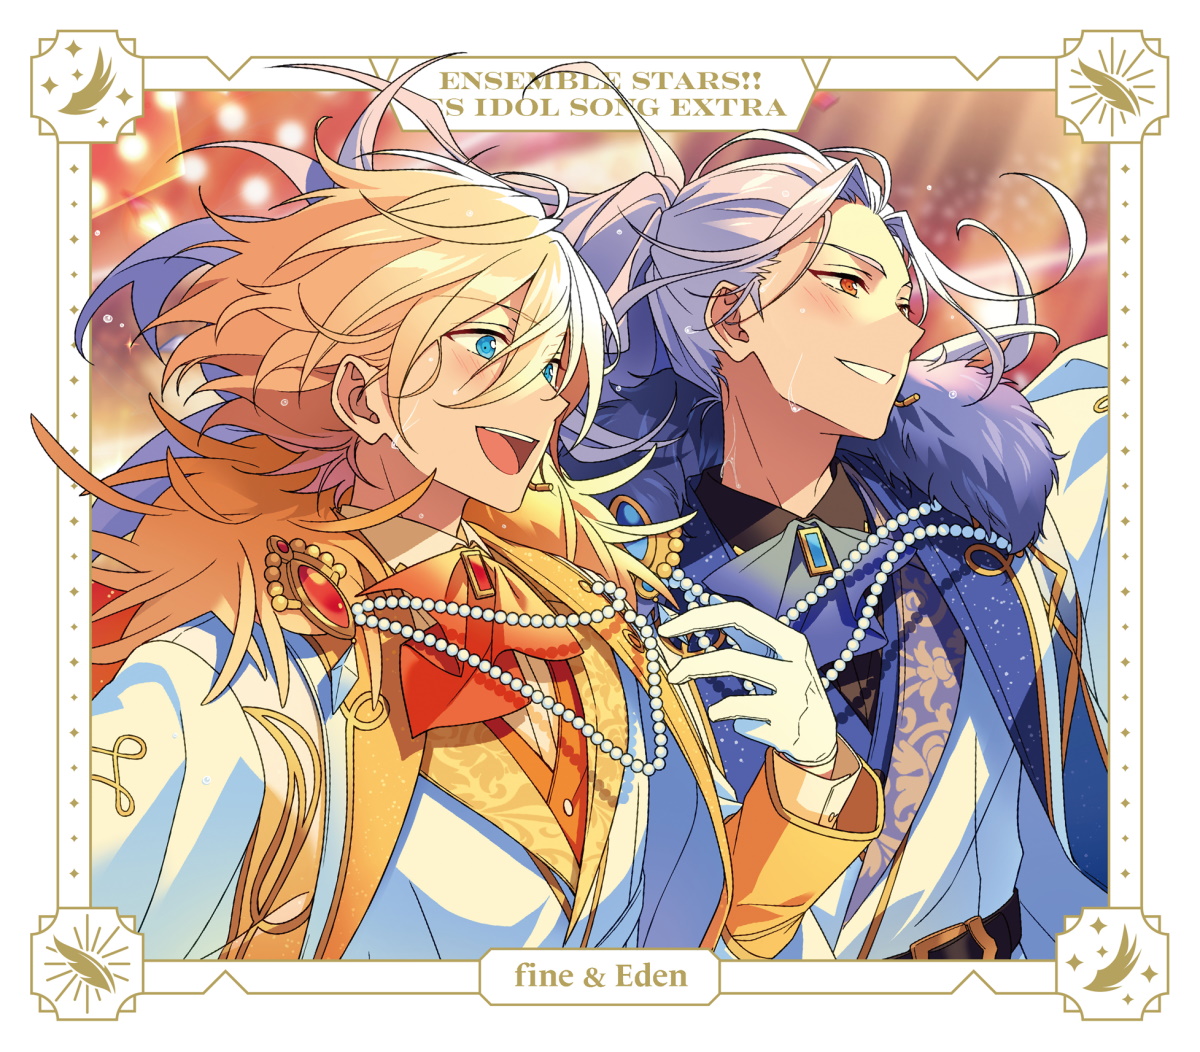 Cover for『fine - Feathers of Ark』from the release『Ensemble Stars!! ES Idol Song Extra fine & Eden』